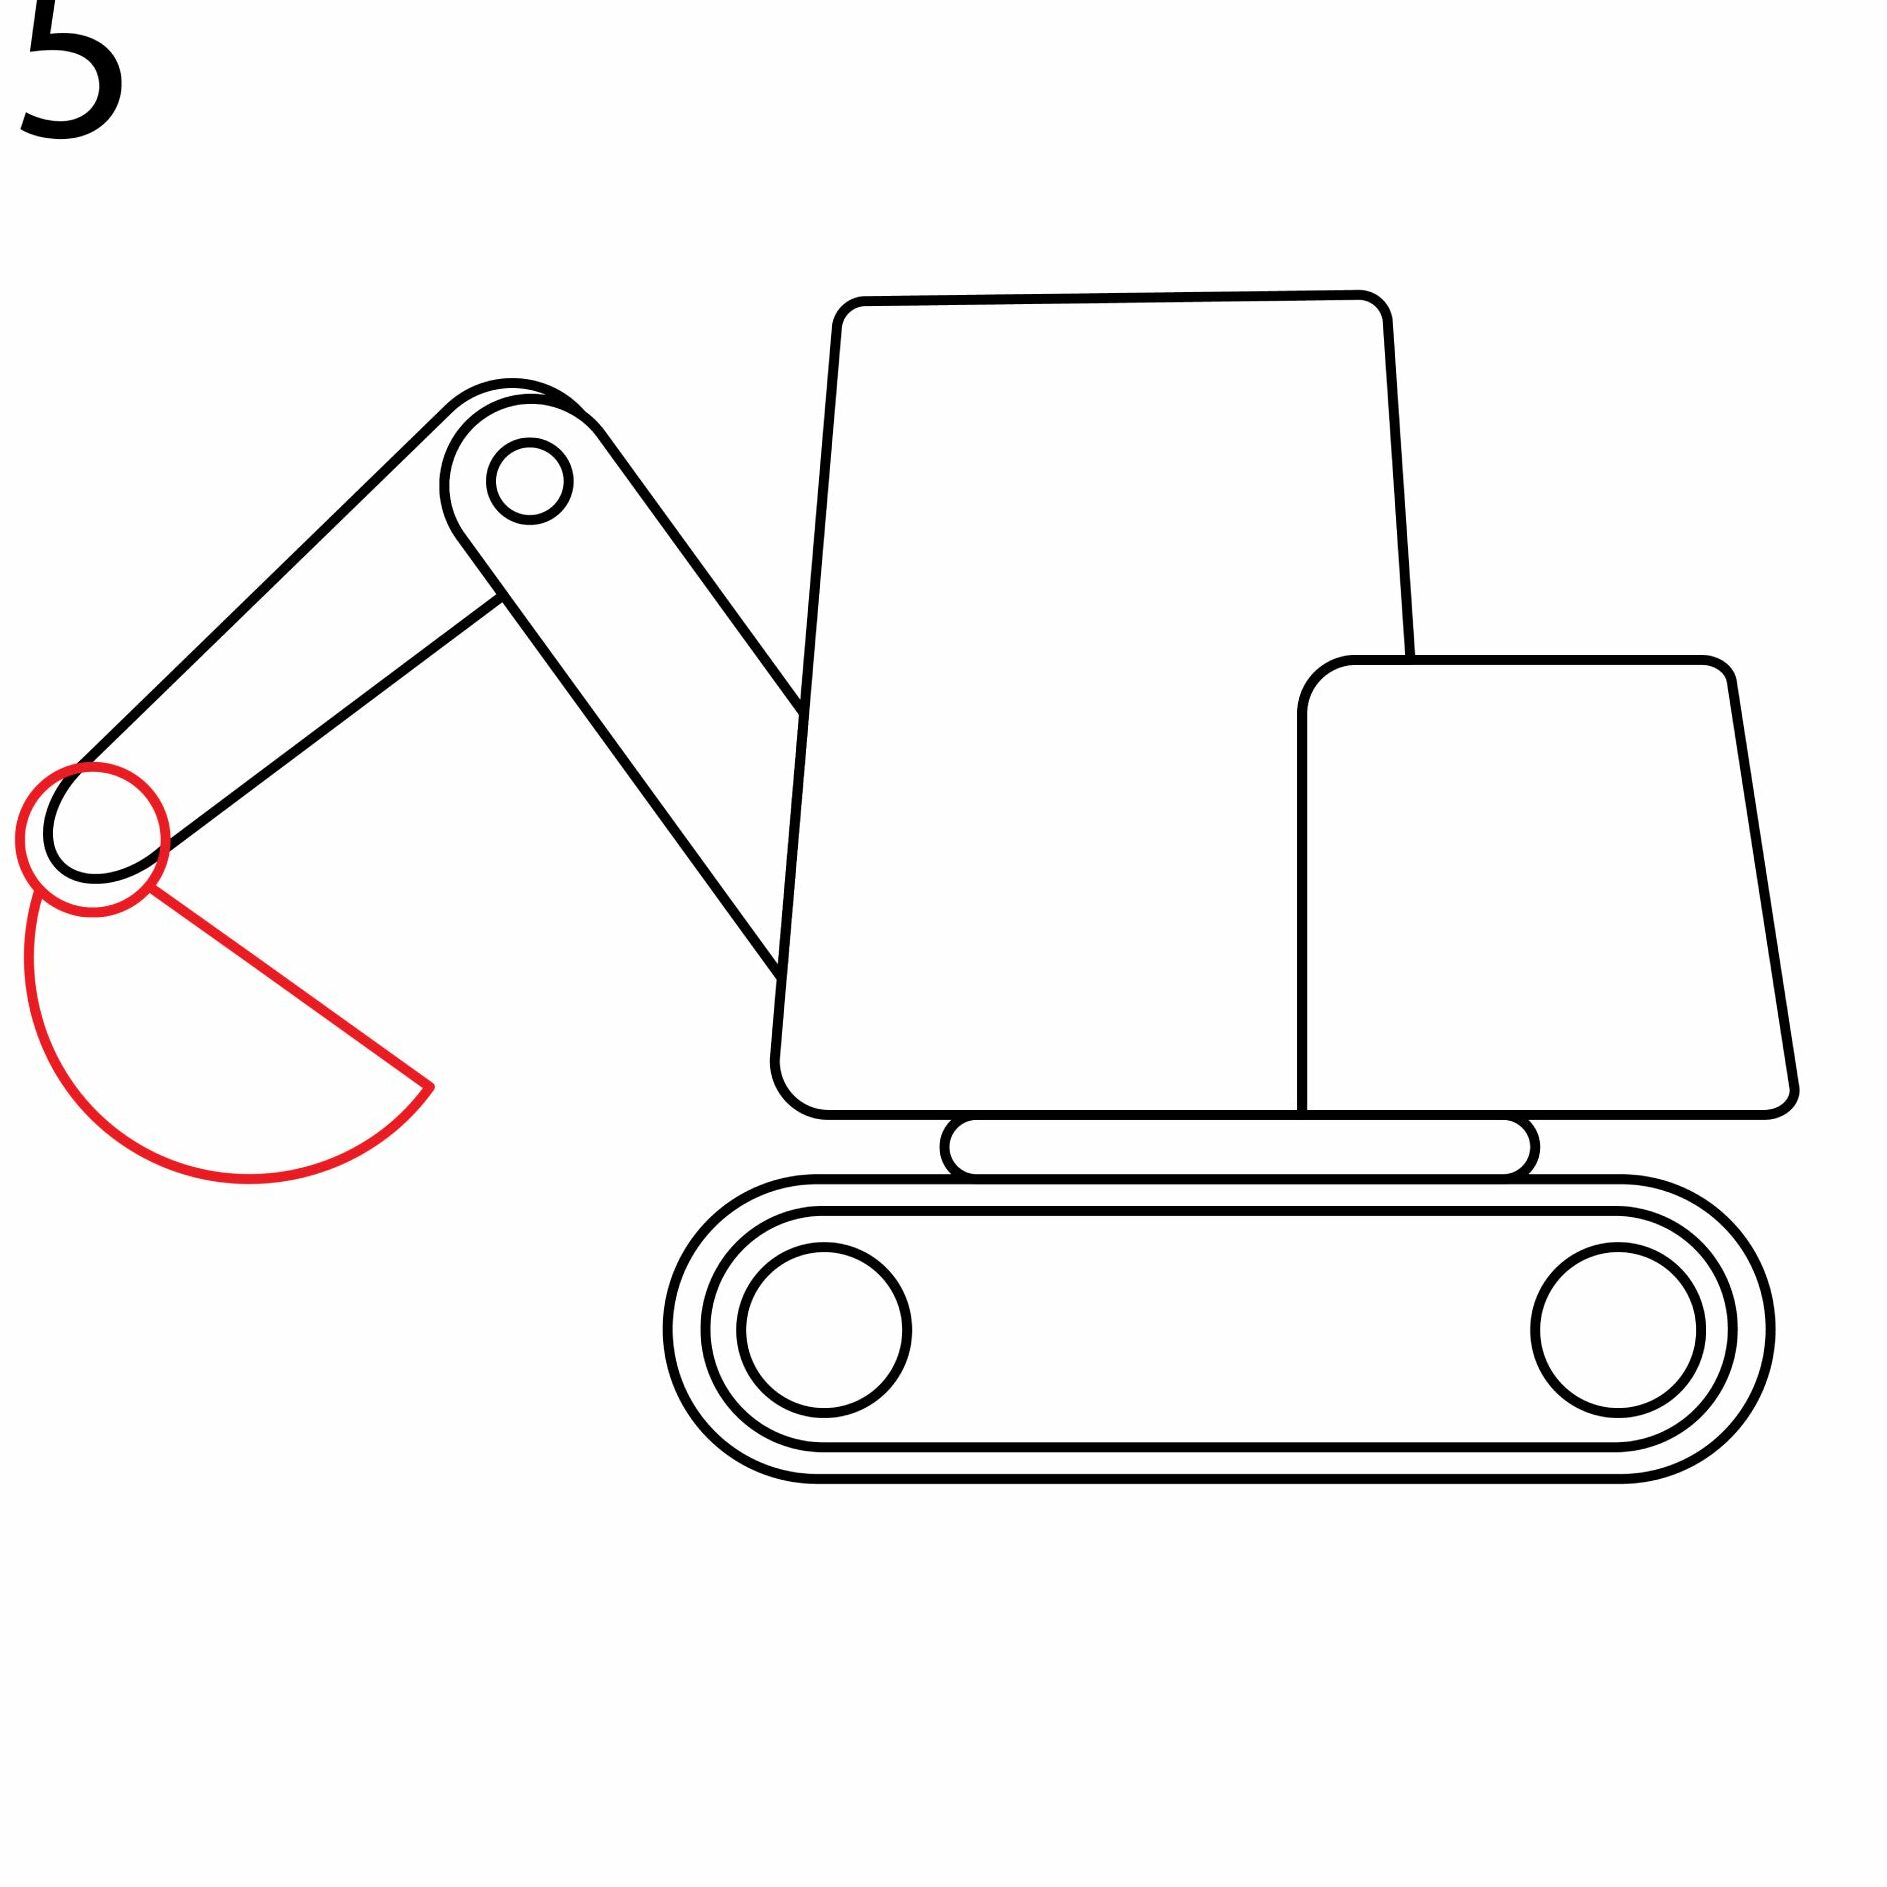 how to draw an excavator